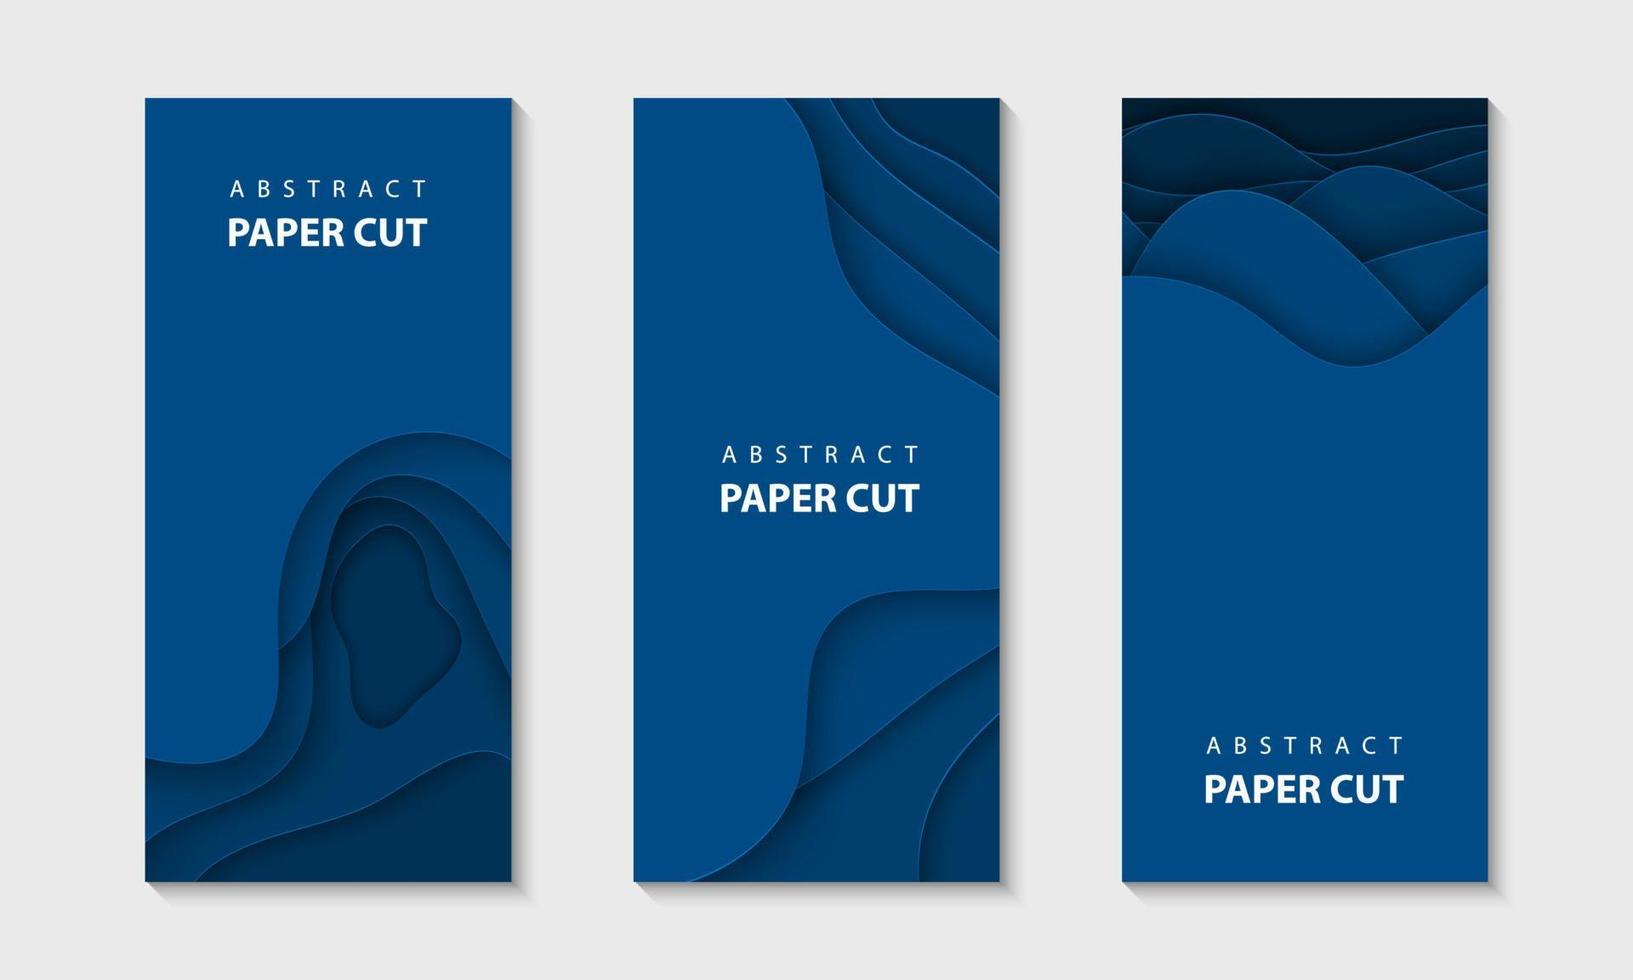 Vector vertical flyers with trendy blue paper cut waves shapes. 3D abstract paper style, design layout for business presentations, flyers, posters, prints, decoration, cards, brochure cover, banners.